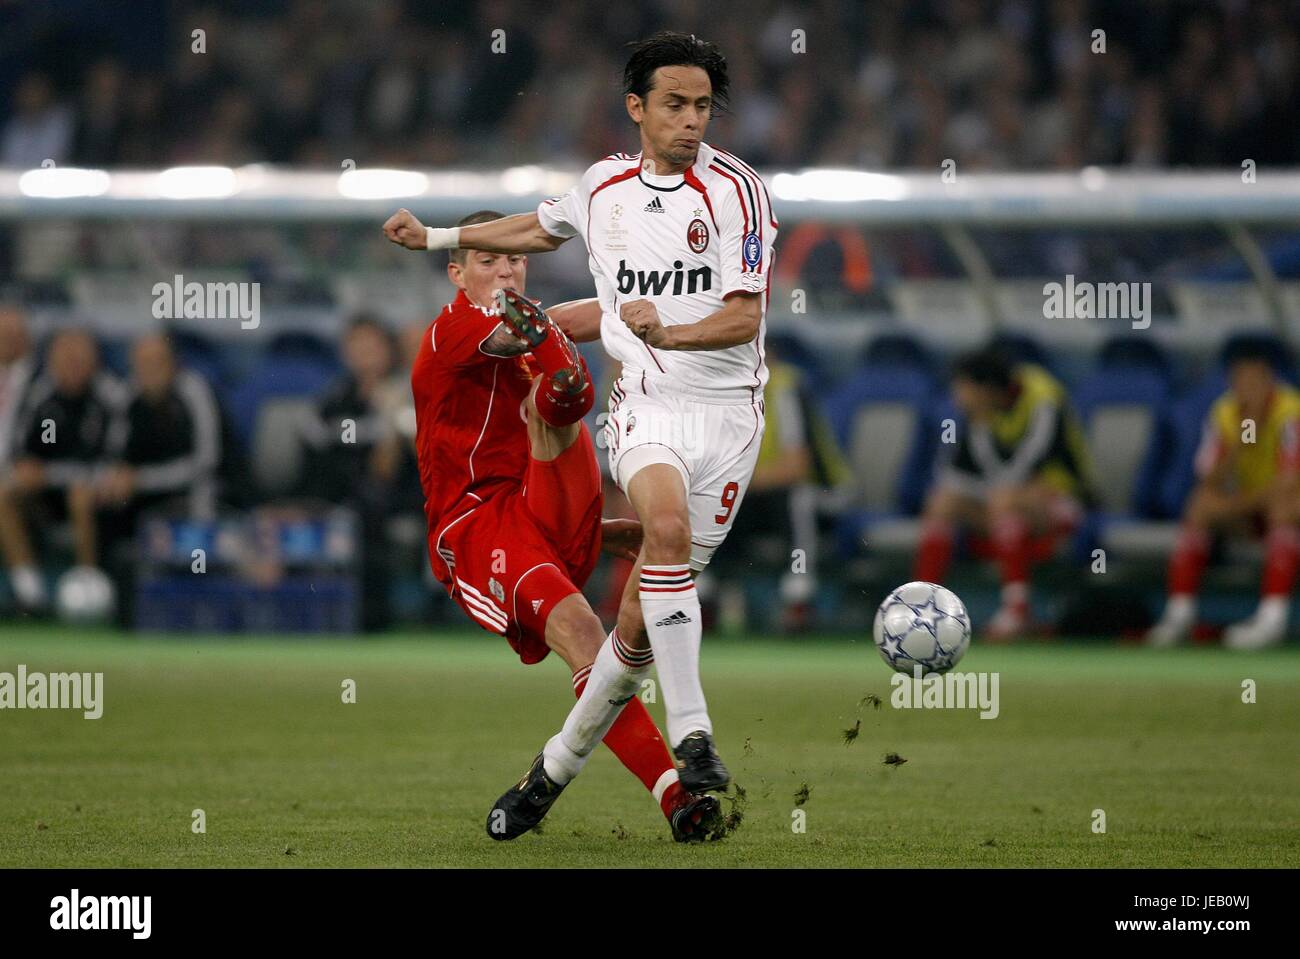 DANIEL AGGER & FILIPPO INZAGHI AC MILAN V LIVERPOOL OLYMPIC STADIUM ATHENS GREECE 23 May 2007 Stock Photo